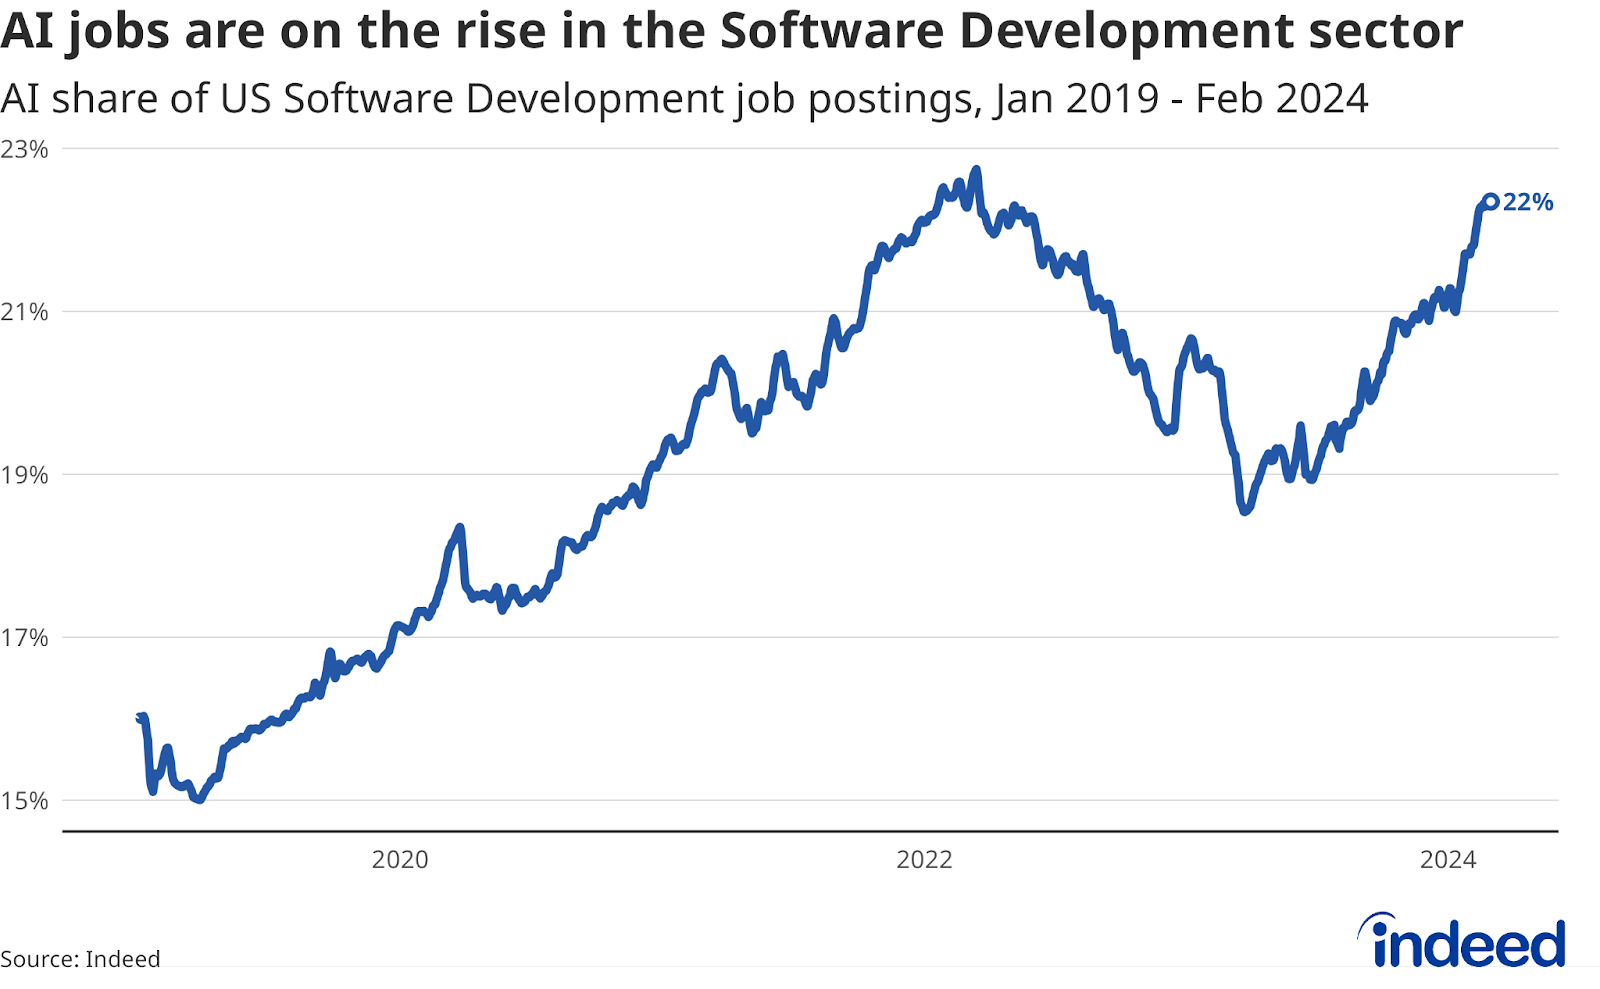 A line graph titled “AI jobs are on the rise in the Software Development sector” showing the AI share of Software Development jobs from January 2019 to February 2024. The AI share in this sector rose from 2019 through early 2022 before falling until summer 2023. The share is now rising and is almost at its March 2022 peak.